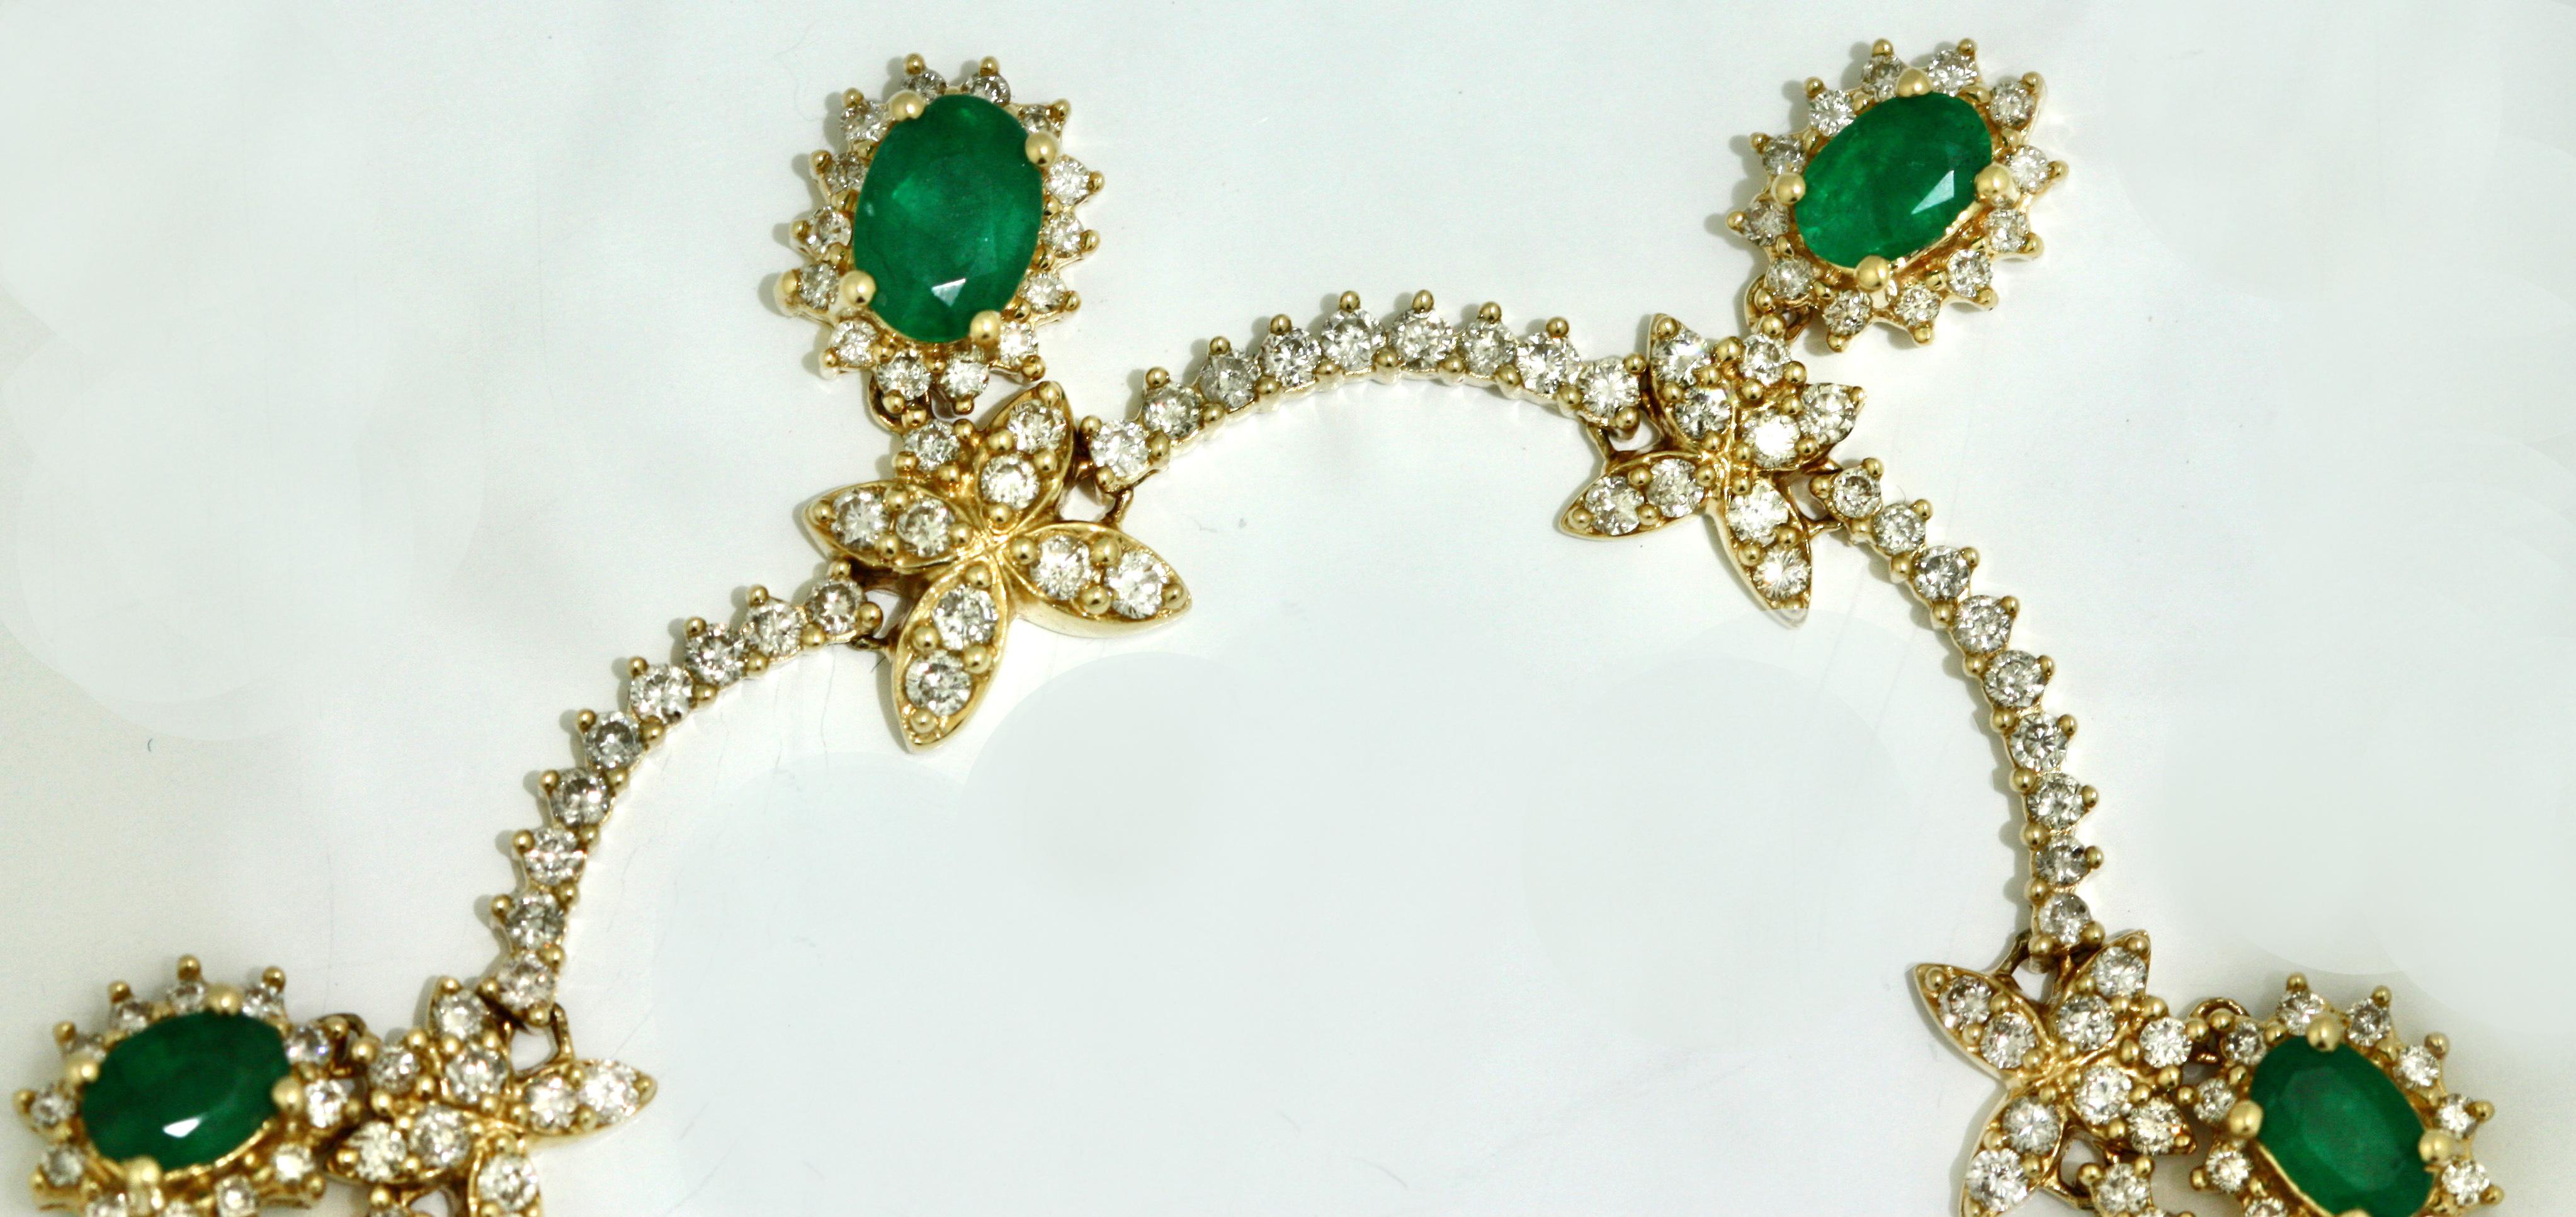 Emerald and Diamond Necklace Mounted in 14 Karat Gold 2